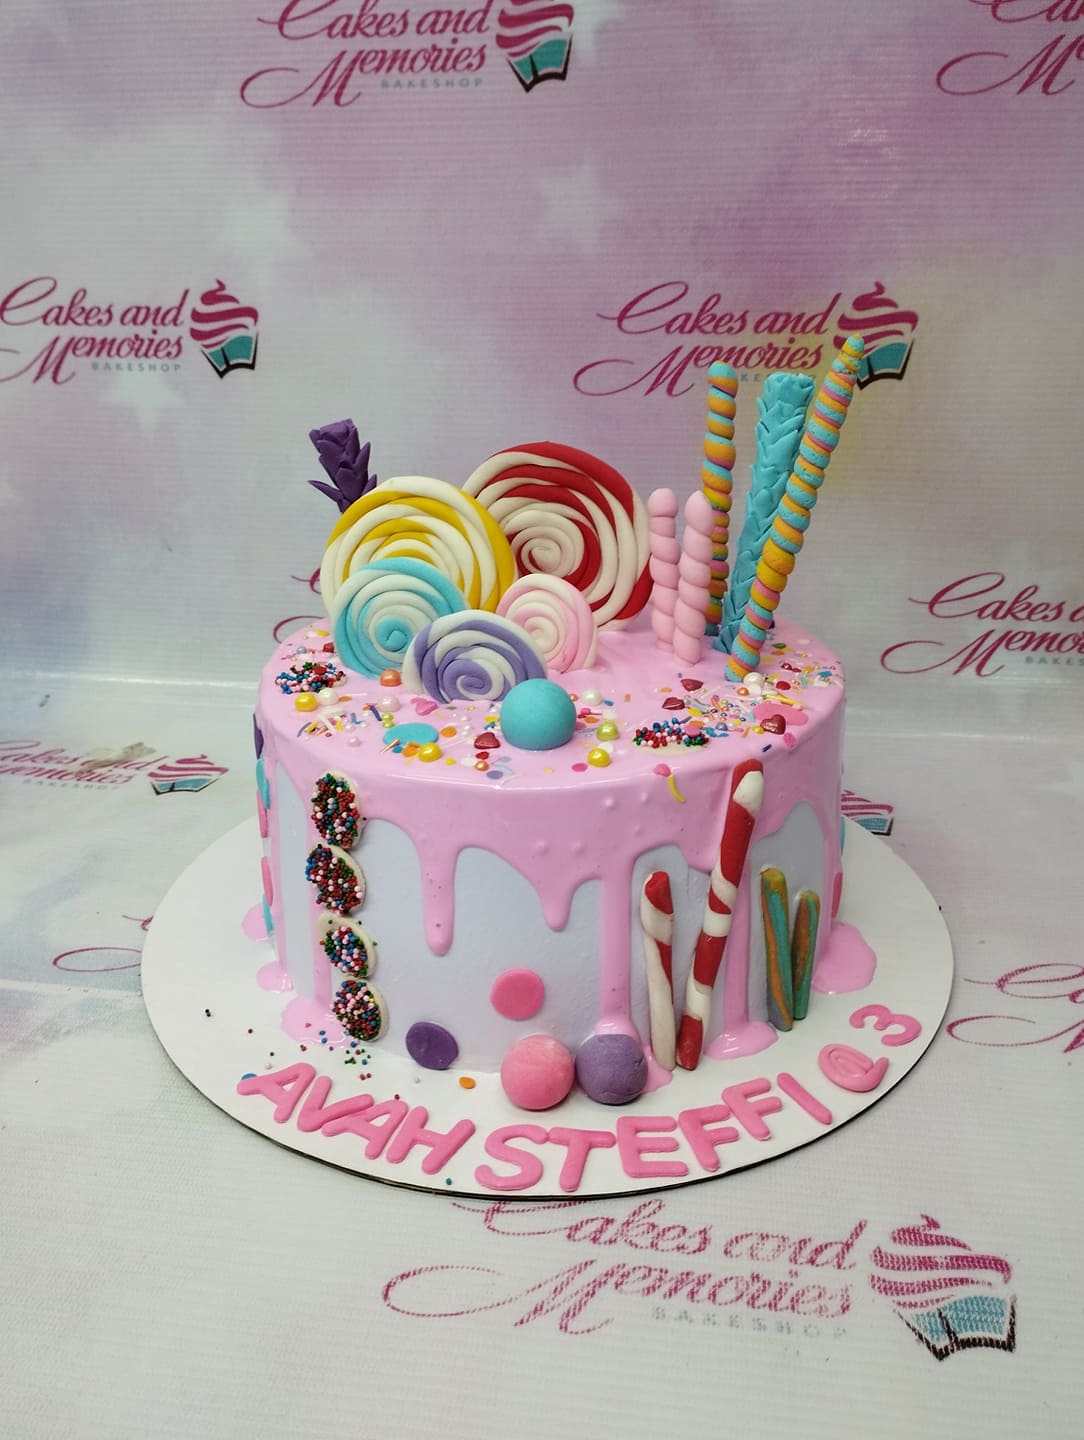 Candyland Cake - 154 – Cakes and Memories Bakeshop